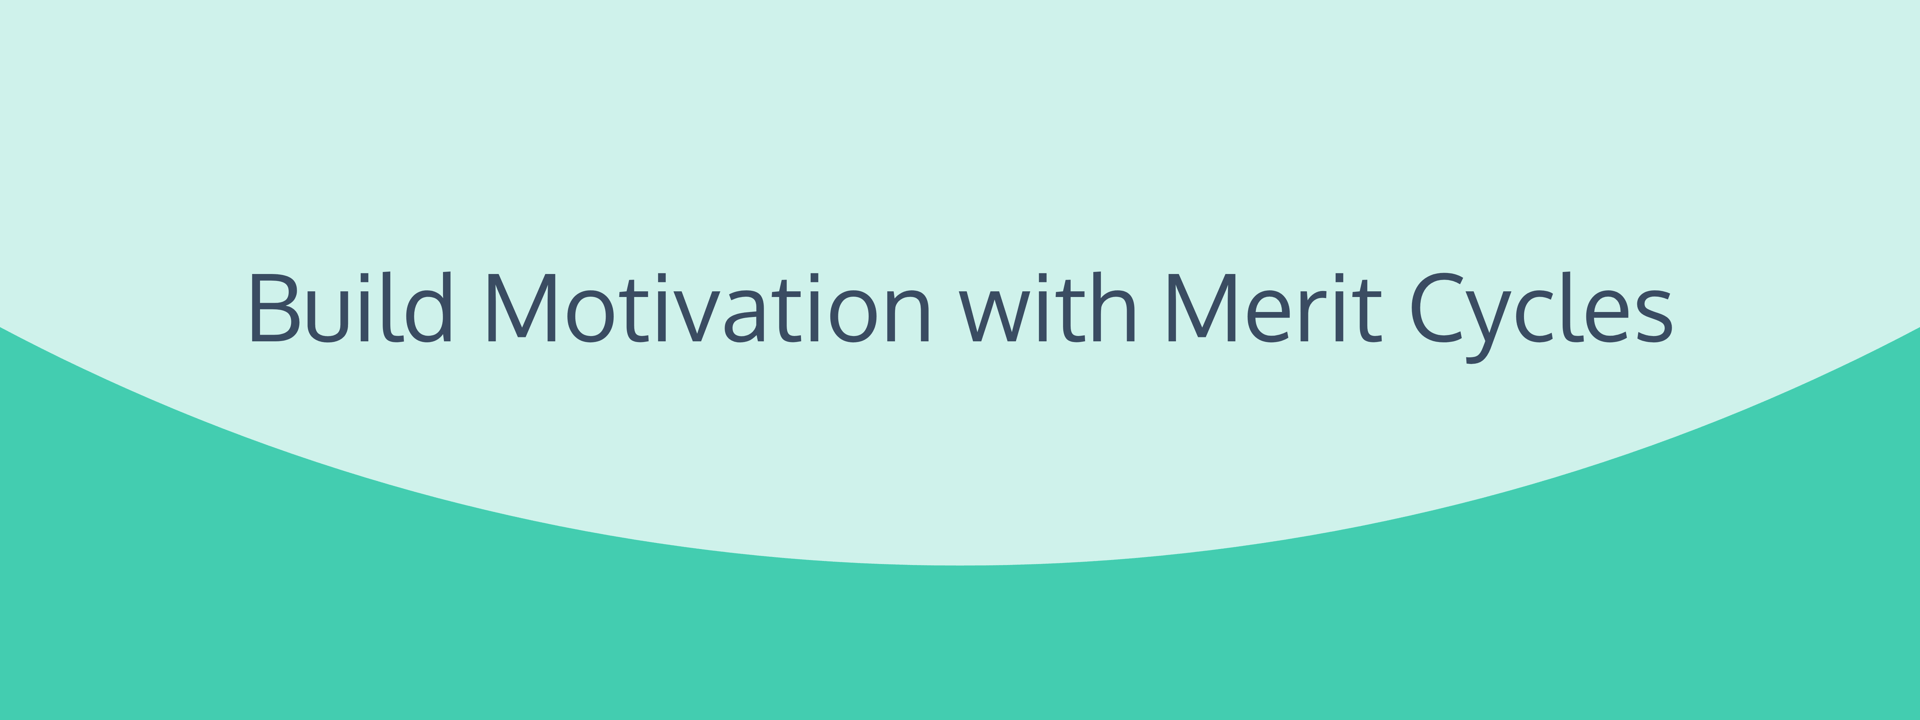 Build Motivation with Merit Cycles